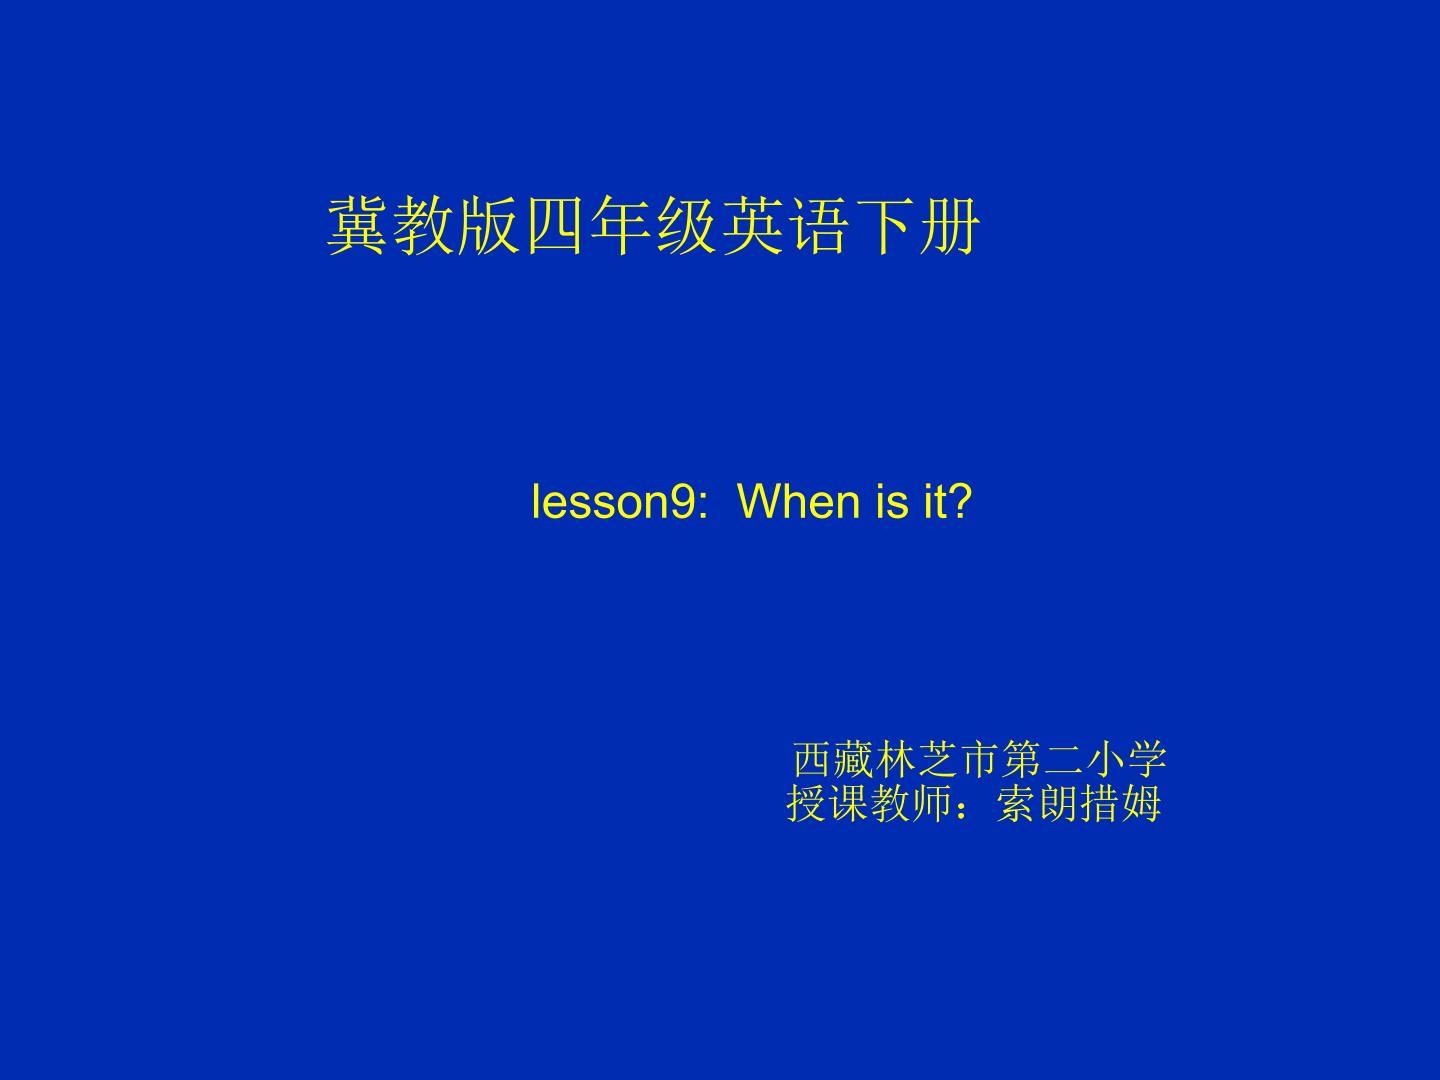 Lesson 9 When is it?